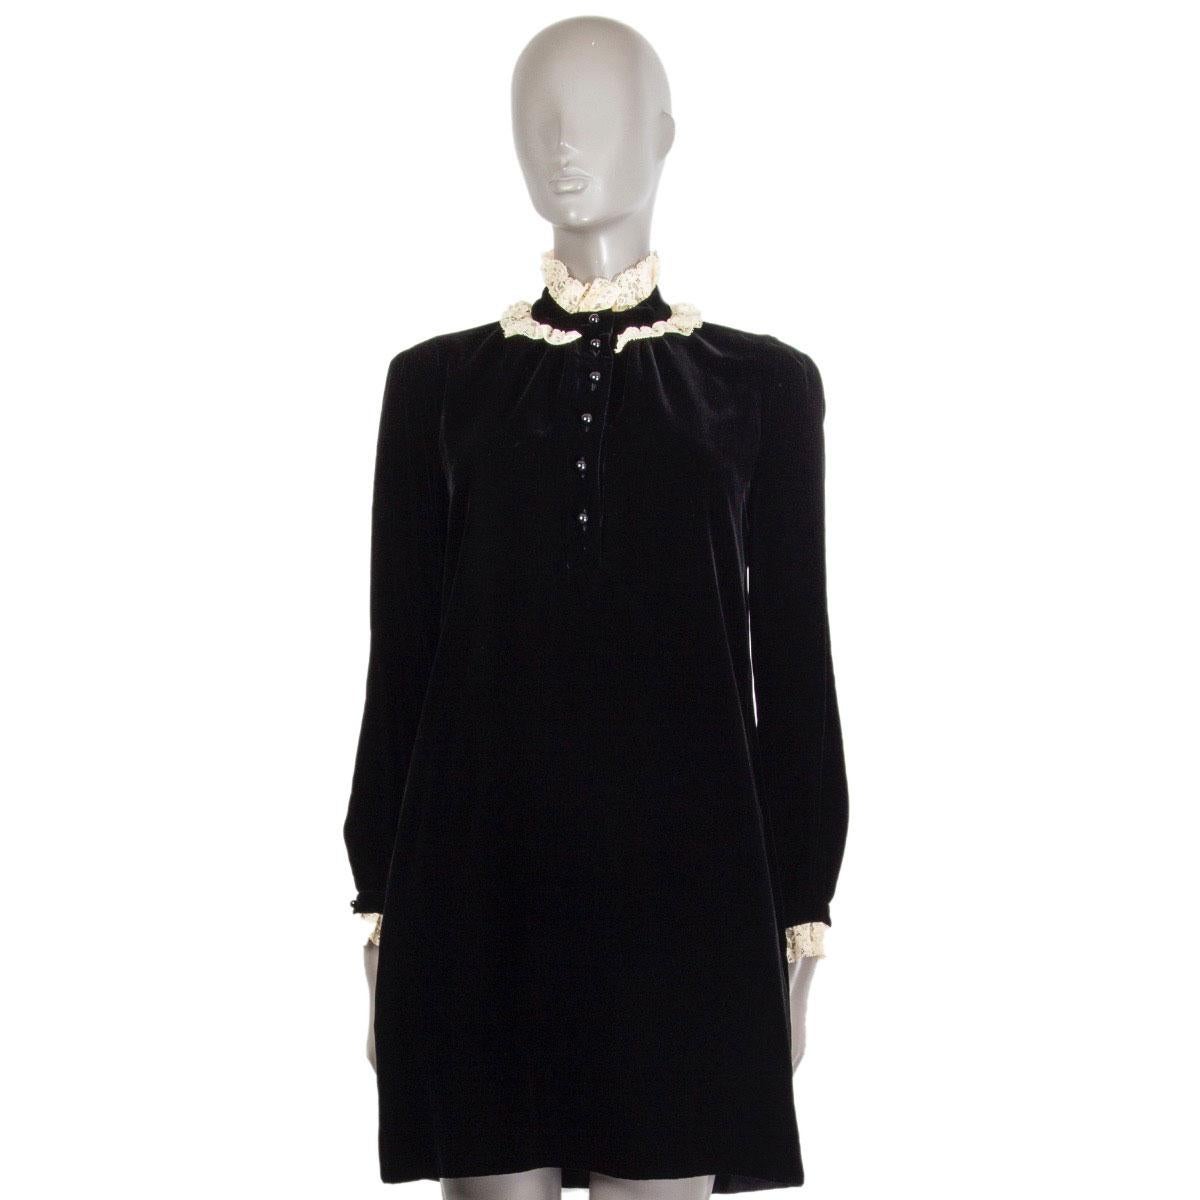 100% authentic Saint Laurent velvet dress in black and vanilla viscose (85%) cupro (35%) with a ruffled lace-collar, straight cut, two slit pockets on both sides, long sleeves with a ruffled lace finishing and buttoned cuff. Closes with button